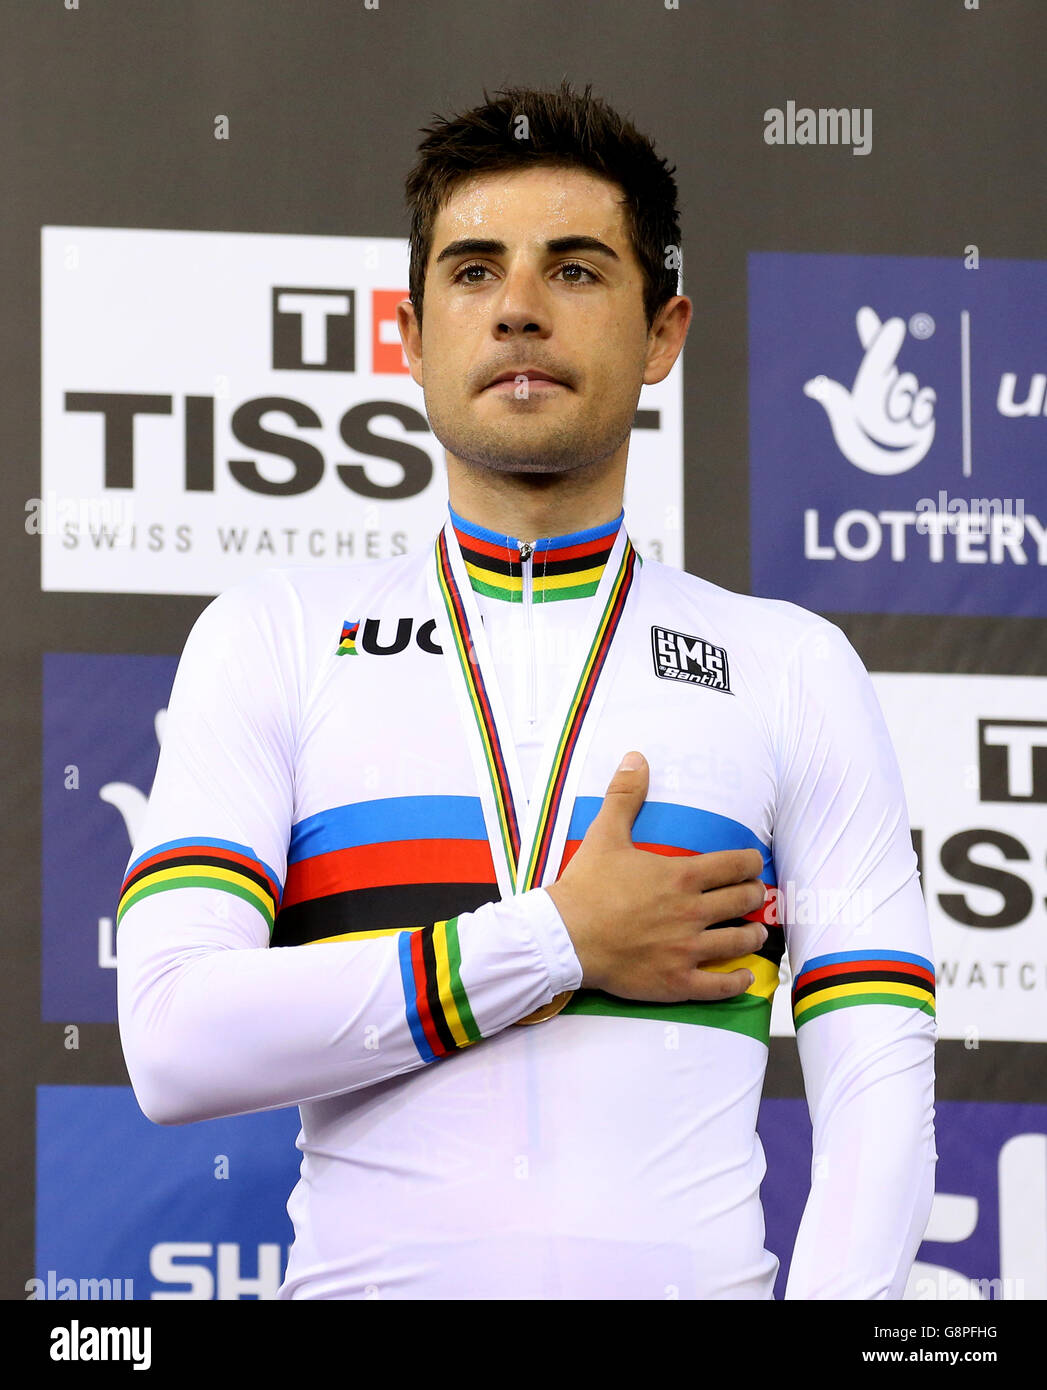 Spain's Sebastian Mora Vedri with his gold medal after winning the Men's Scratch Race during day one of the UCI Track Cycling World Championships at Lee Valley VeloPark, London. Stock Photo